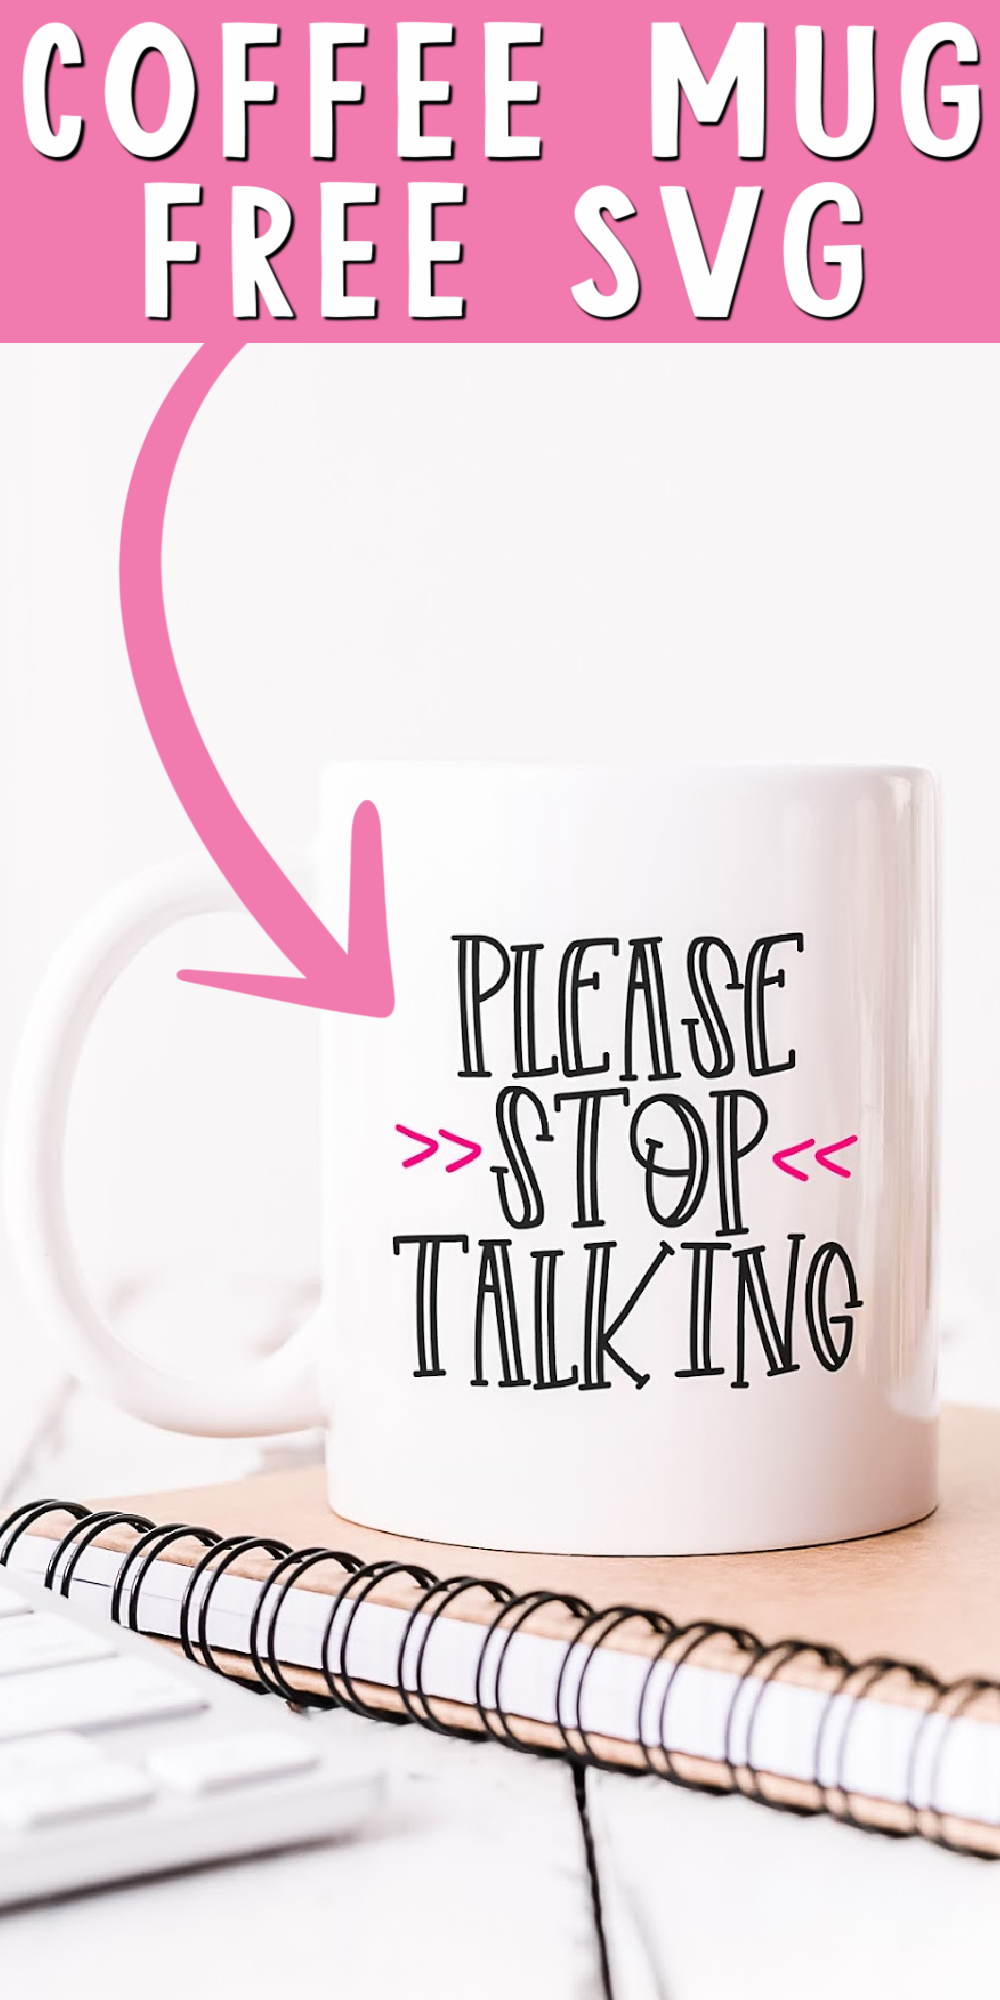 coffee-mug-svg "class =" wp-image-80281 "srcset =" https://www.thecountrychiccottage.net/wp-content/uploads/2021/03/coffee-mug-svg.png 1000w, https: / /www.thecountrychiccottage.net/wp-content/uploads/2021/03/coffee-mug-svg-150x300.png 150w, https://www.thecountrychiccottage.net/wp-content/uploads/2021/03/coffee- mug-svg-512x1024.png 512w, https://www.thecountrychiccottage.net/wp-content/uploads/2021/03/coffee-mug-svg-768x1536.png 768wottage, https://www.thecountrychiccottage.net/ wp-content / uploads / 2021/03 / coffee-mug-svg-610x1220.png 610w "data-lazy-tailles =" (largeur max: 1000px) 100vw, 1000px "data-pin-media =" https: // www.thecountrychiccottage.net/wp-content/uploads/2021/03/coffee-mug-svg.png "src =" https://www.thecountrychiccottage.net/wp-content/uploads/2021/03/coffee-mug -svg.png "/><noscript><img decoding=